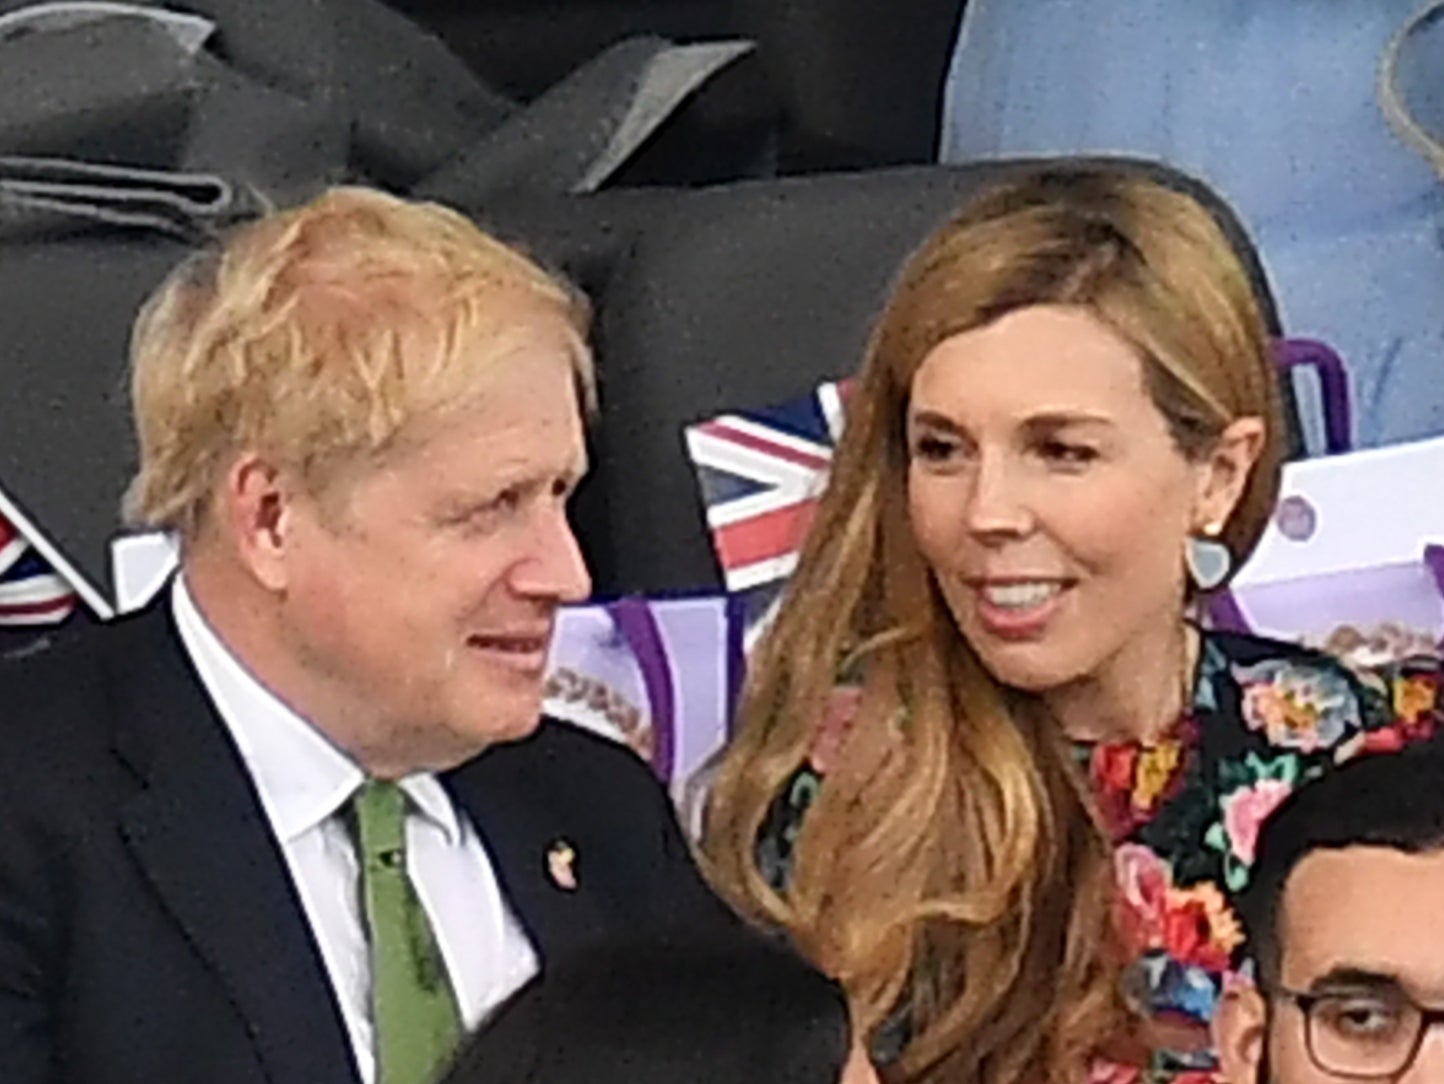 Boris Johnson and wife Carrie Symonds attended the platinum jubilee concert